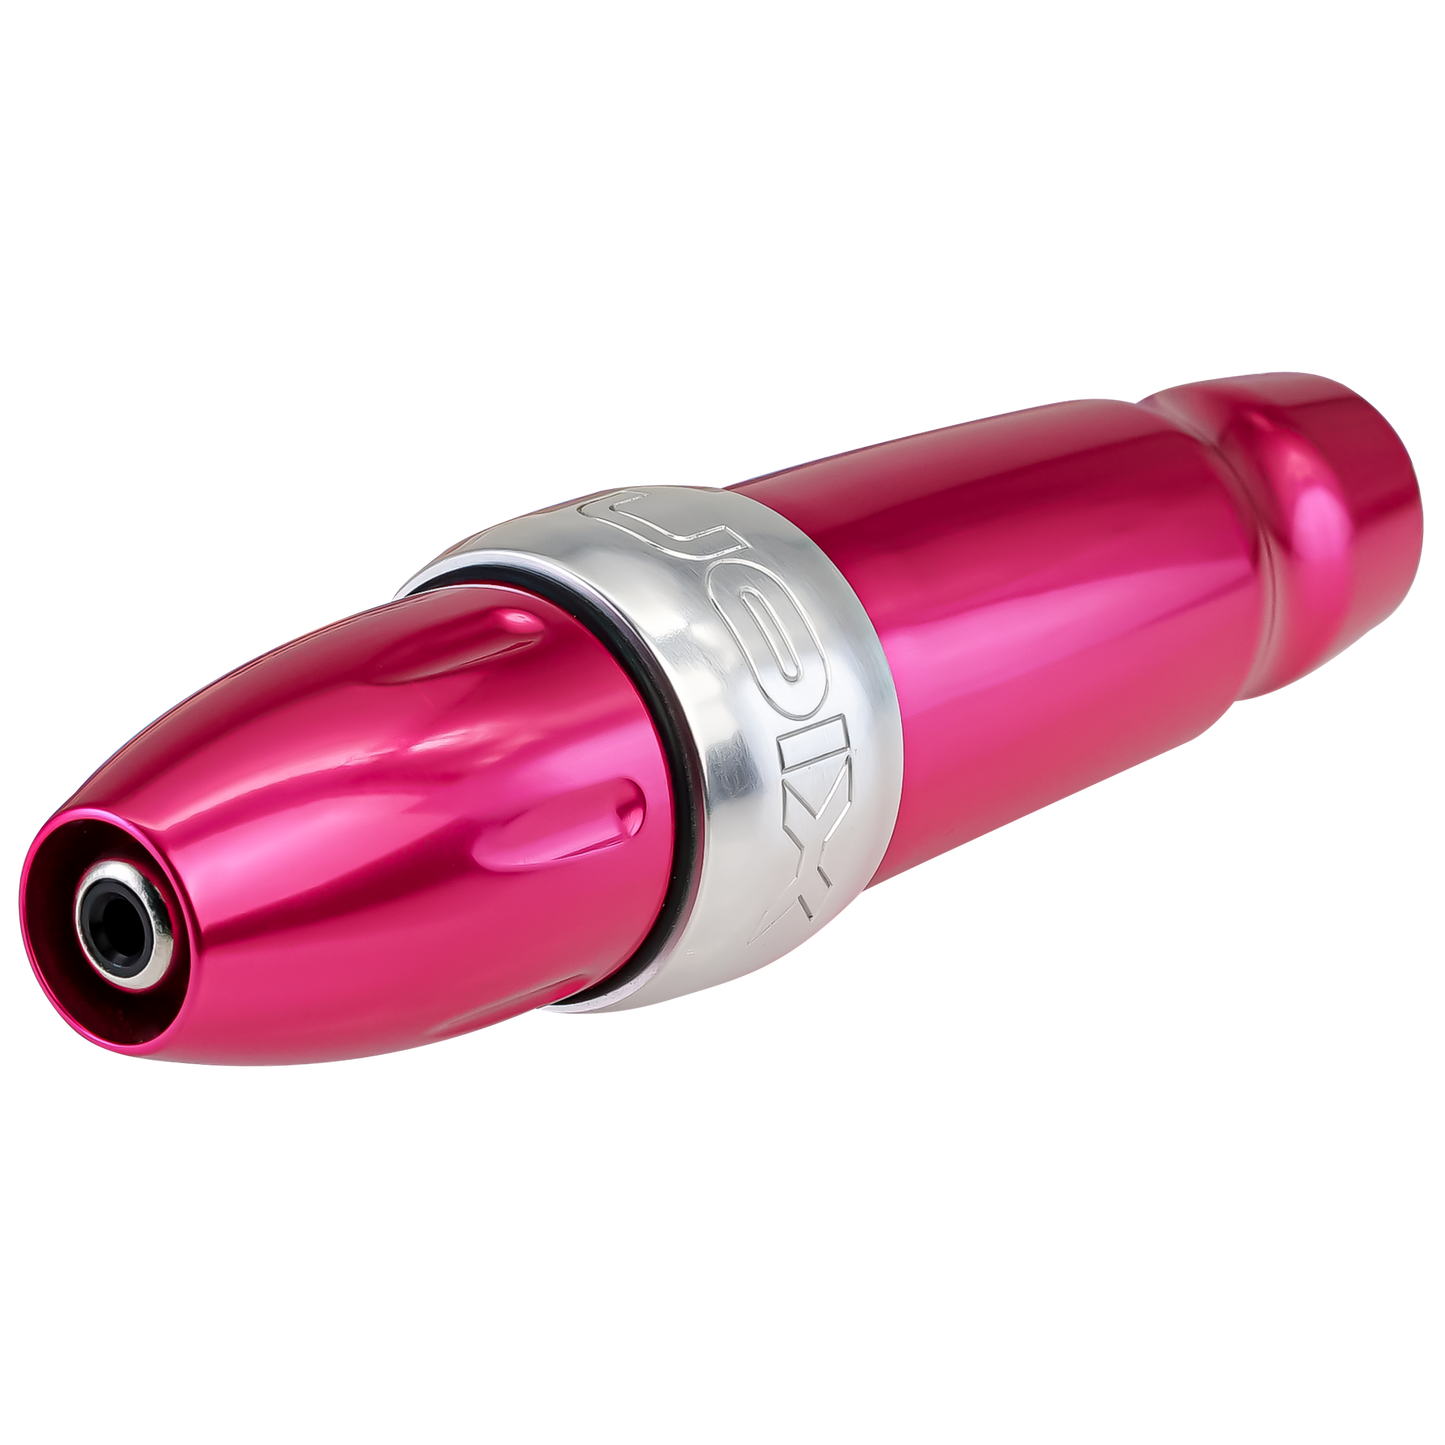 Xion S, one of the most versatile machines in the PMU industry, which allows you to easily change the give and the stroke length, shown in bubblegum pink anodized alluminum, view of RCA plug